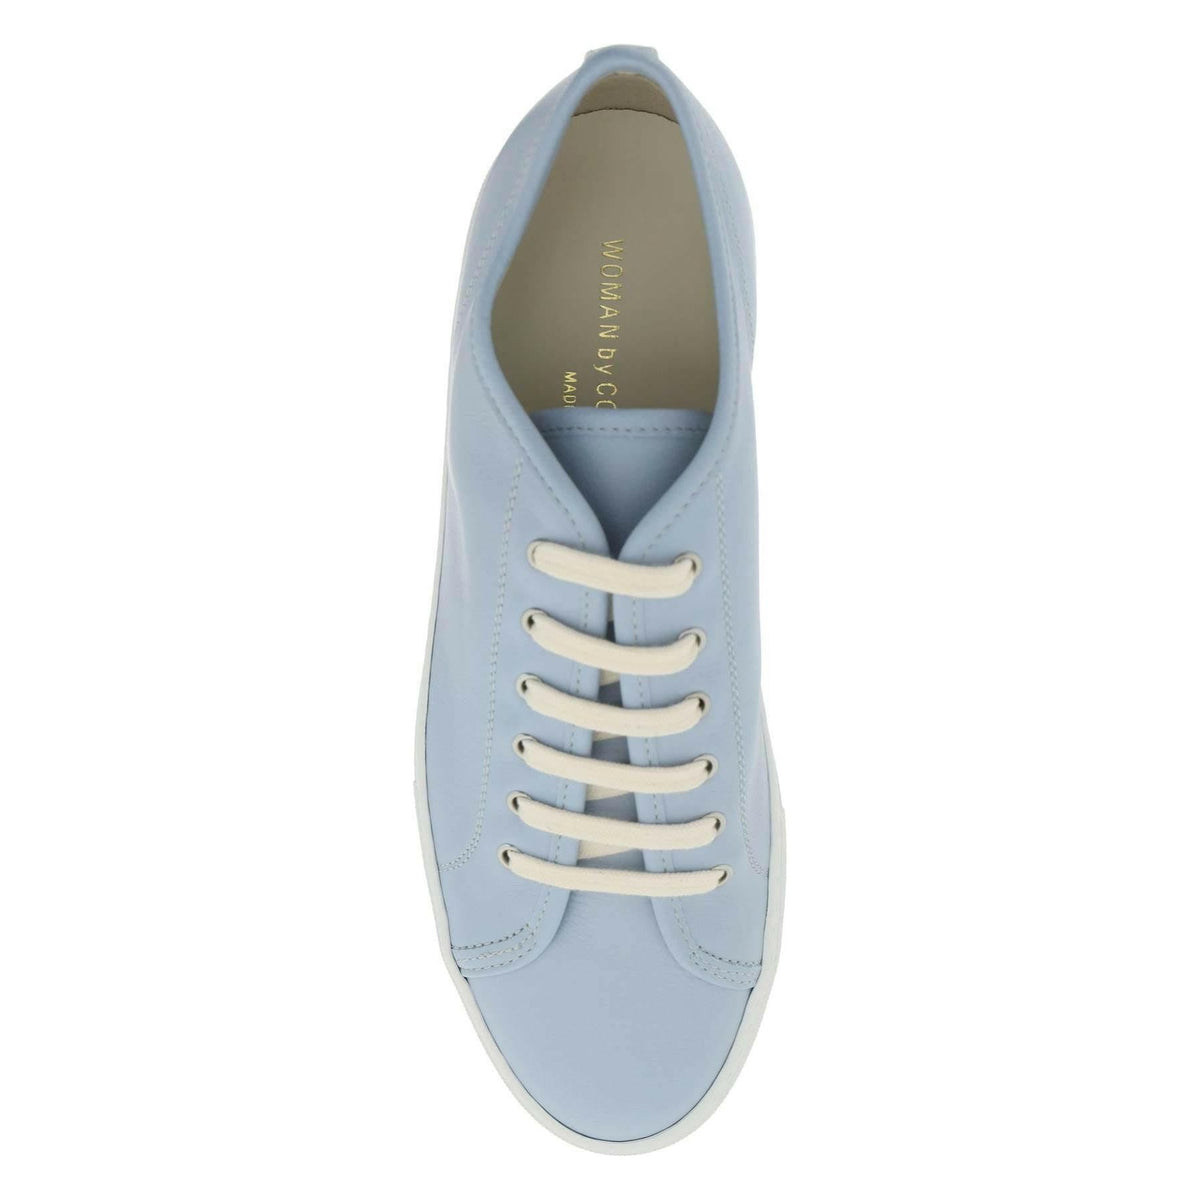 COMMON PROJECTS - Leather Tournament Low Super Sneakers - JOHN JULIA